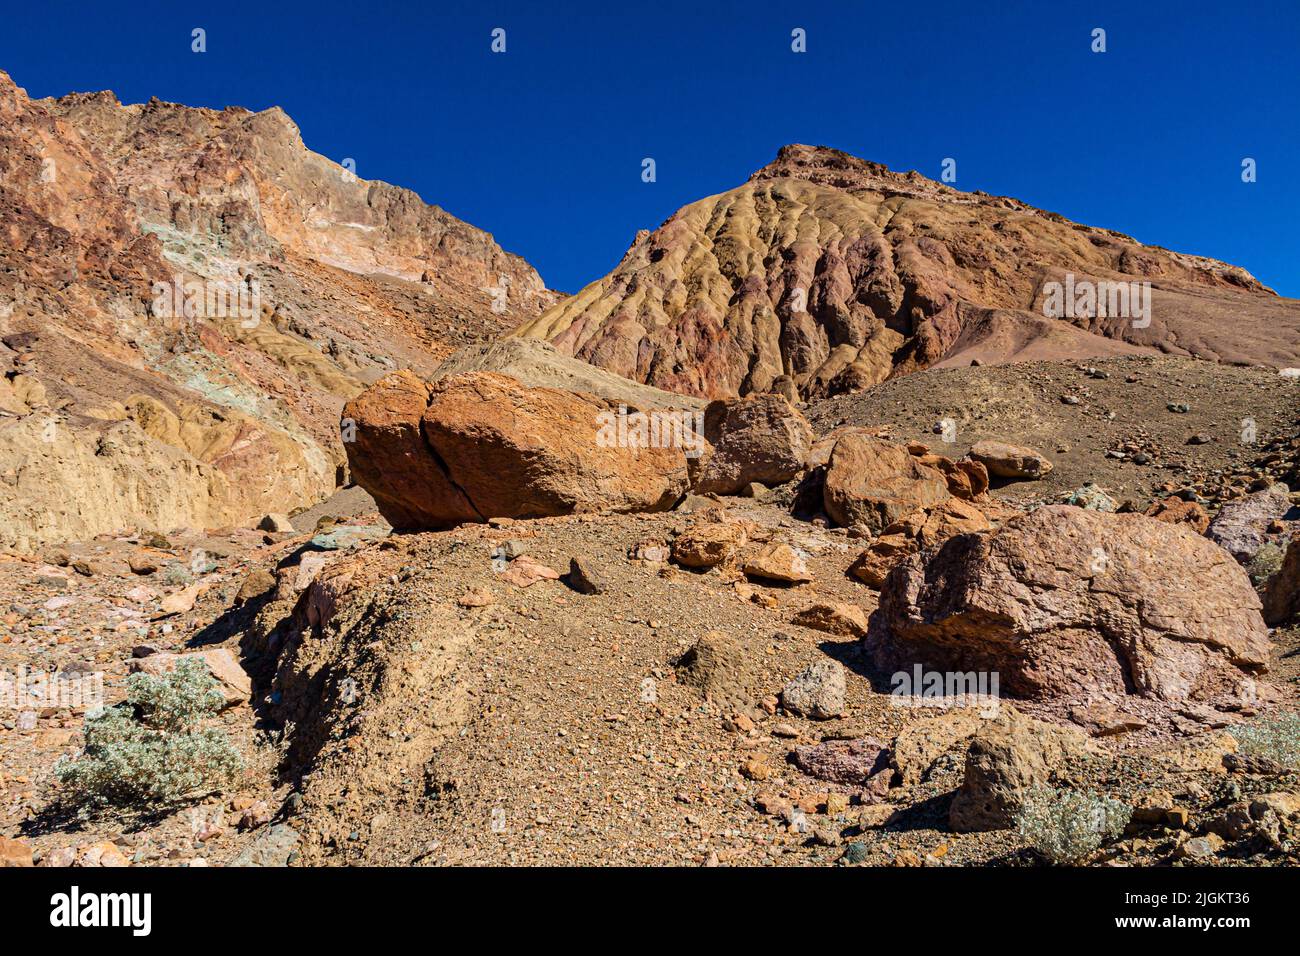 Boulders Washed Down the Alluvial Fan On the Multi-Colored Mountains of Artist's Palette, Death Valley National Park, California, USA Stock Photo